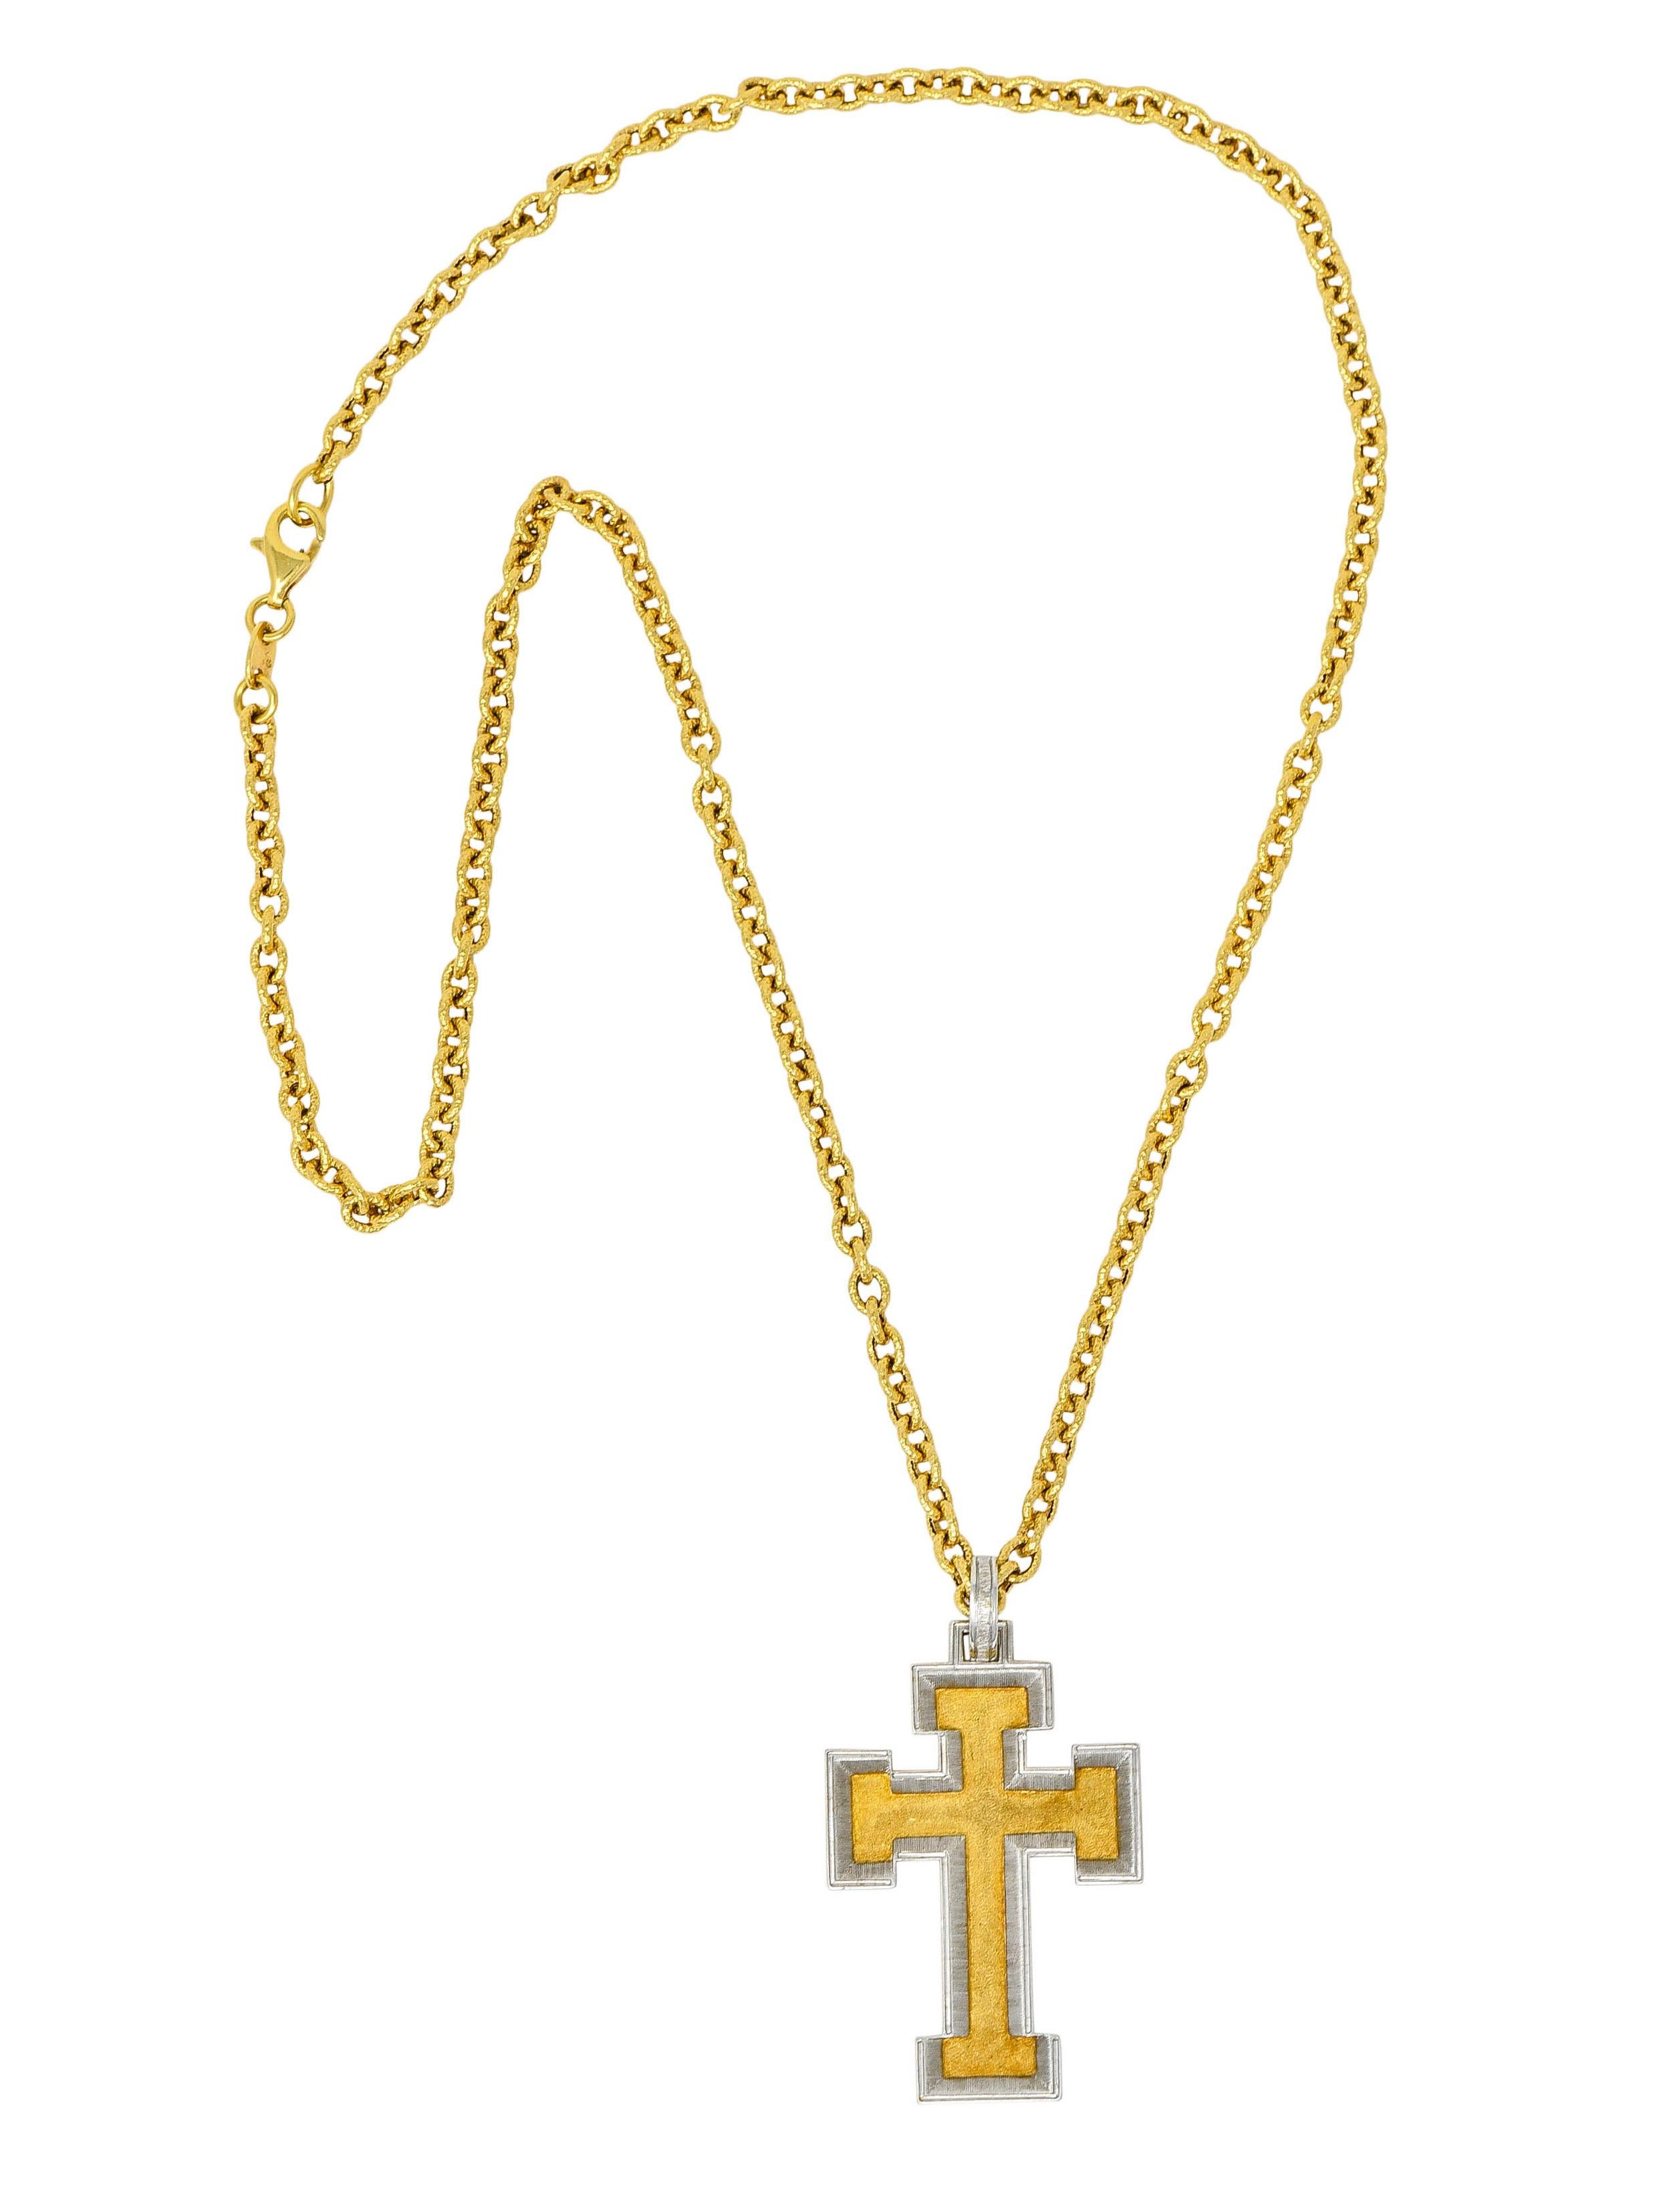 Stylized cable chain necklace is comprised of textured links and completes as a lobster clasp

Suspending a matte two-tone gold cross with chamfered white gold edges leading to a yellow gold center

Featuring a strong brushed and stippled finish